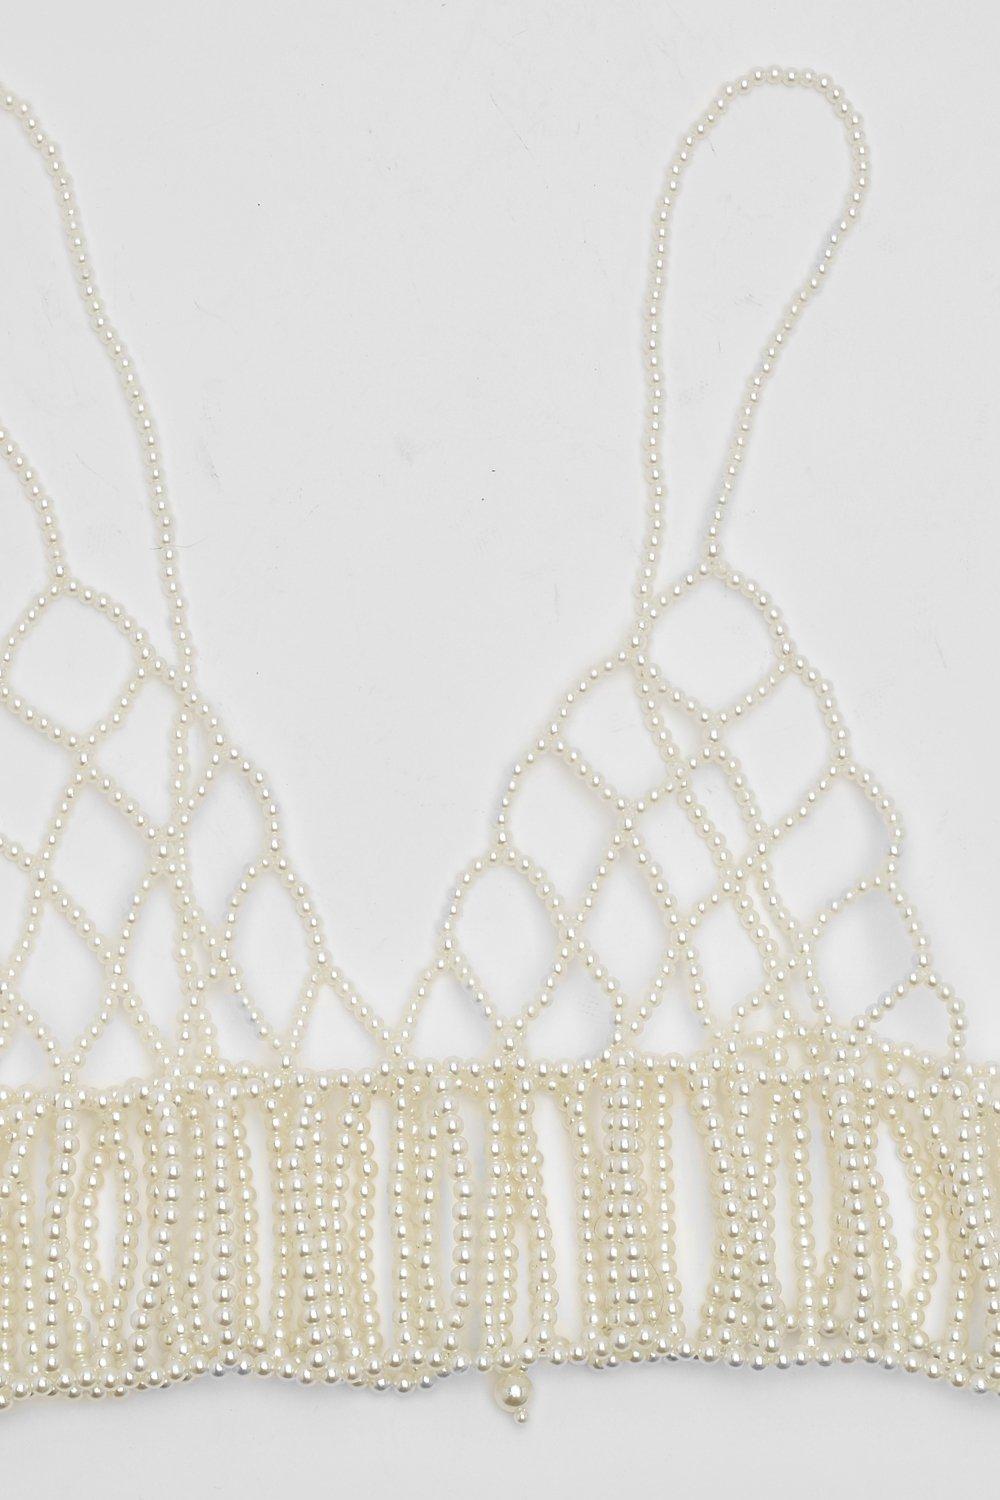 Sexy Big Pearl Crop Top Rave Festival Metal Chain Bralette Beaded Camis  Tank